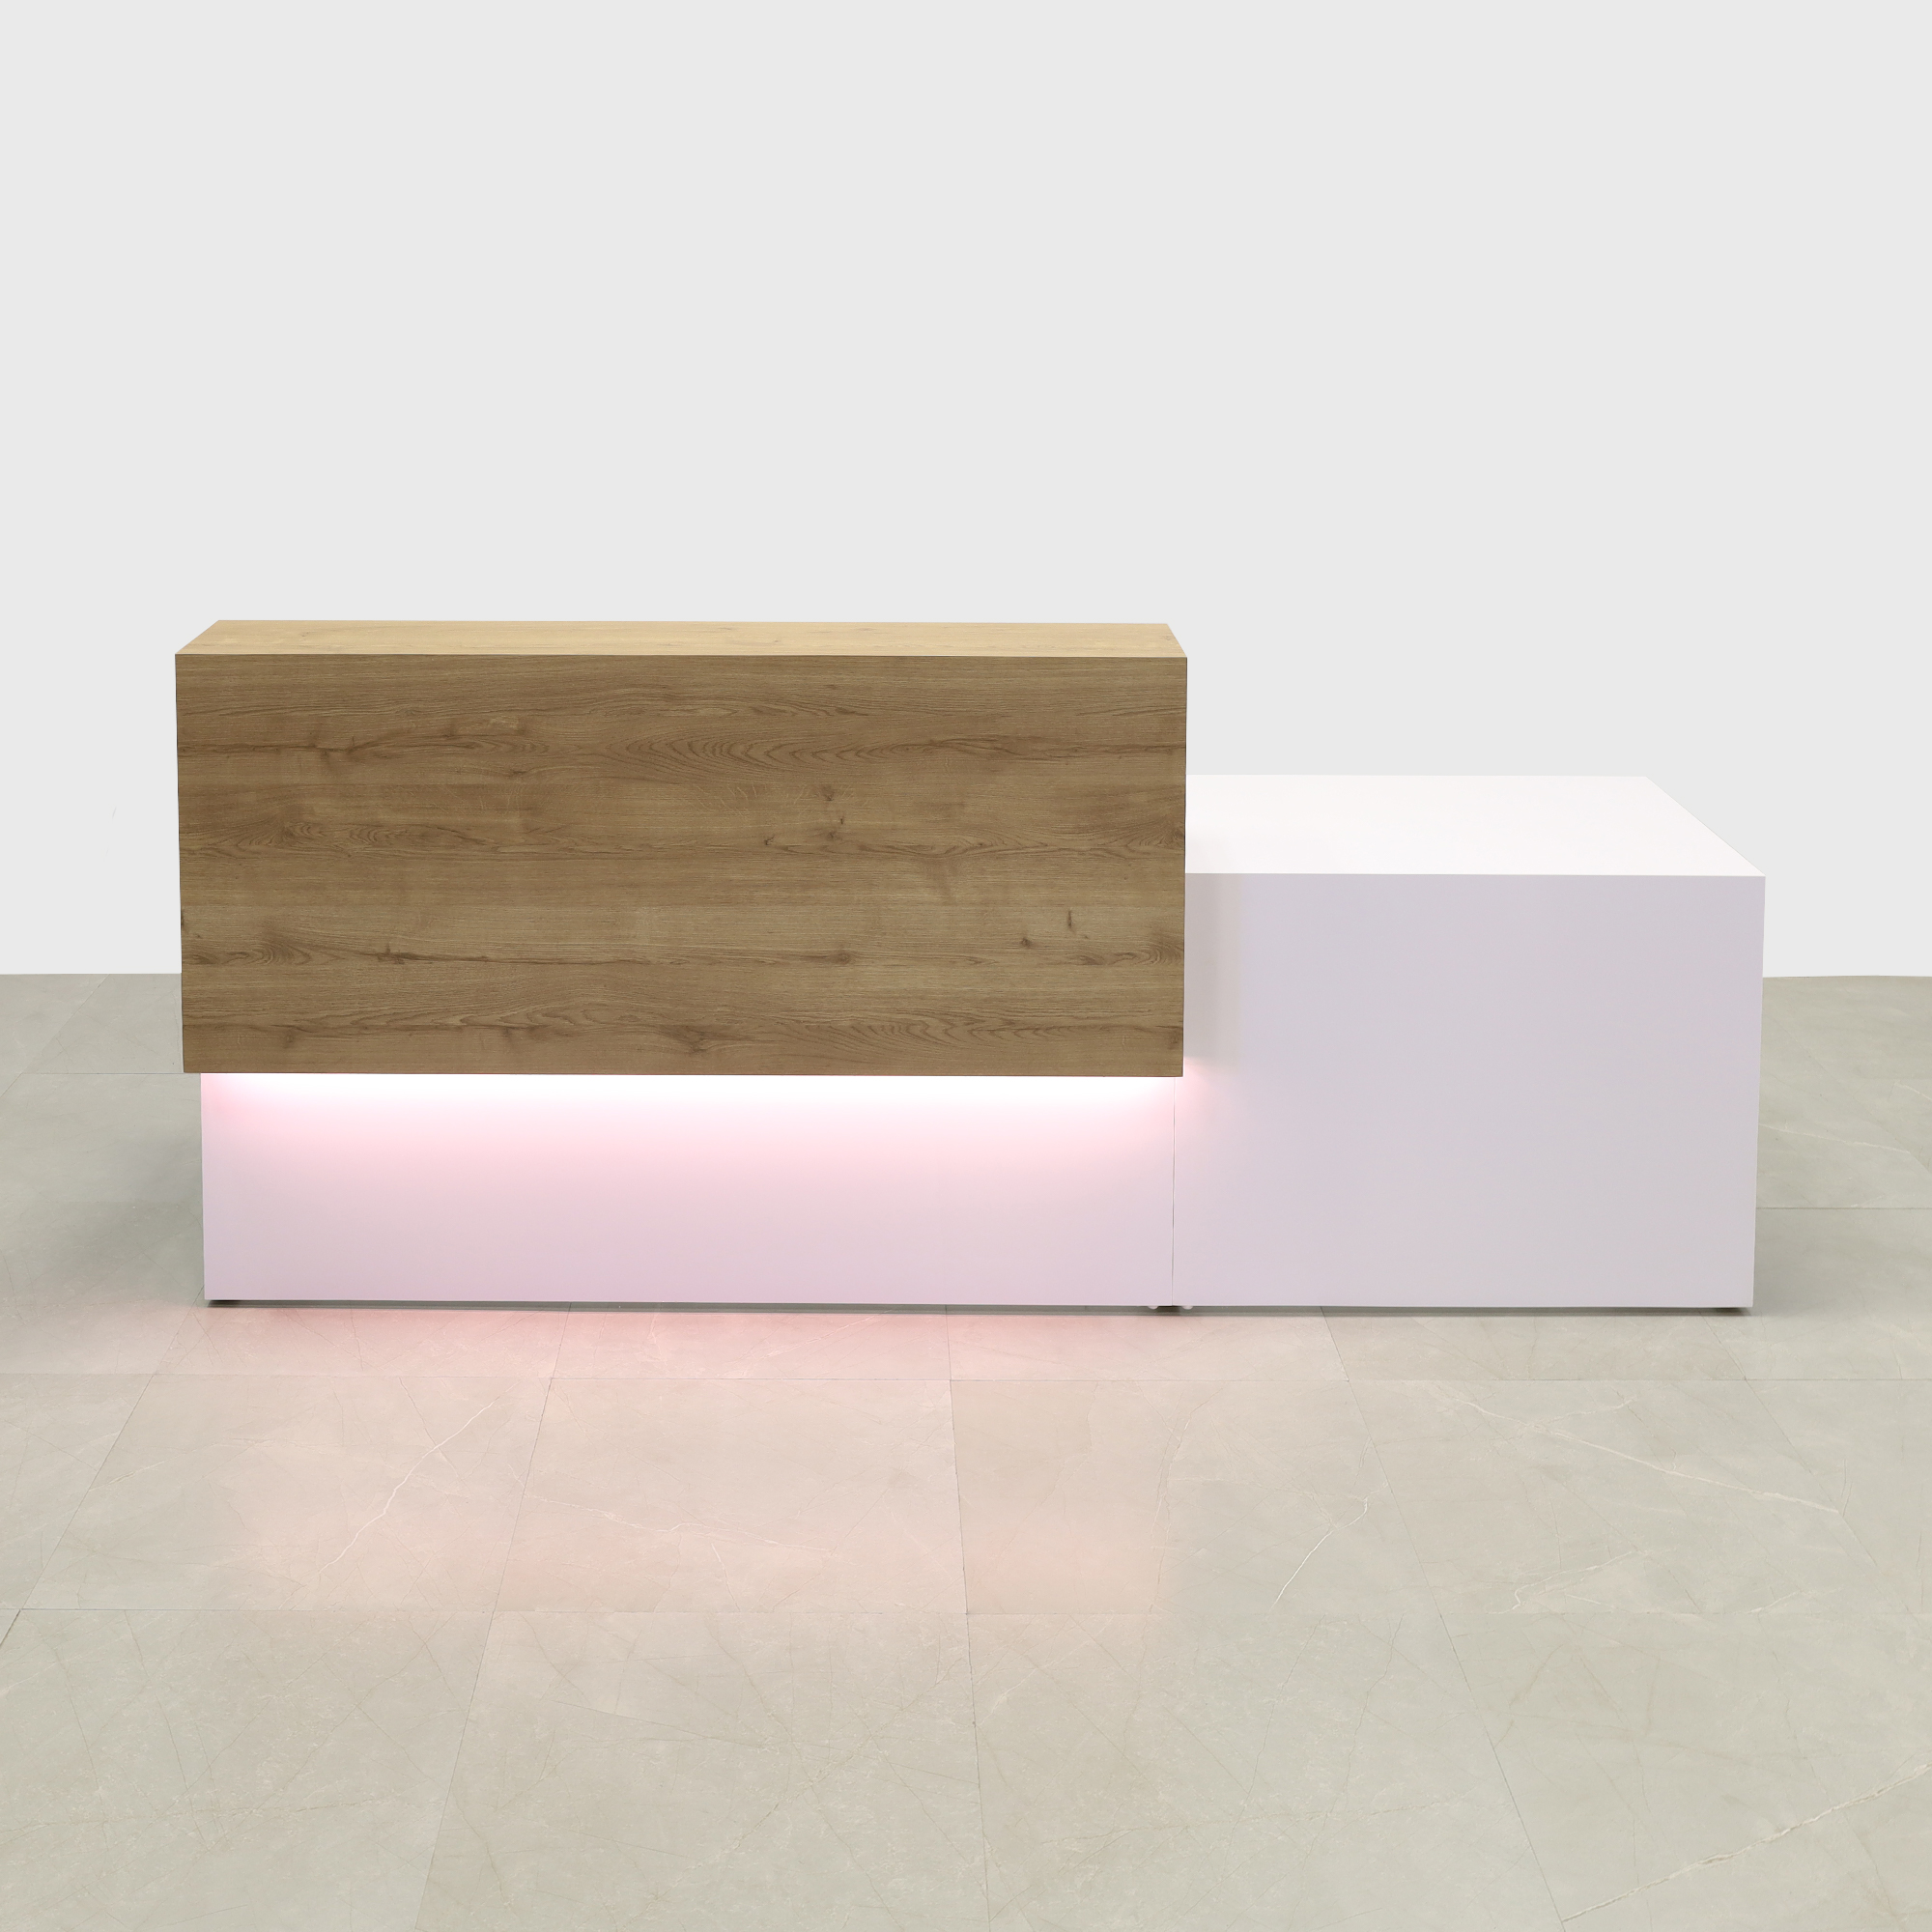 Los Angeles Long and ADA Compliant Custom Reception Desk in urban oak laminate counter and white matte laminate desk, with warm white LED shown here.